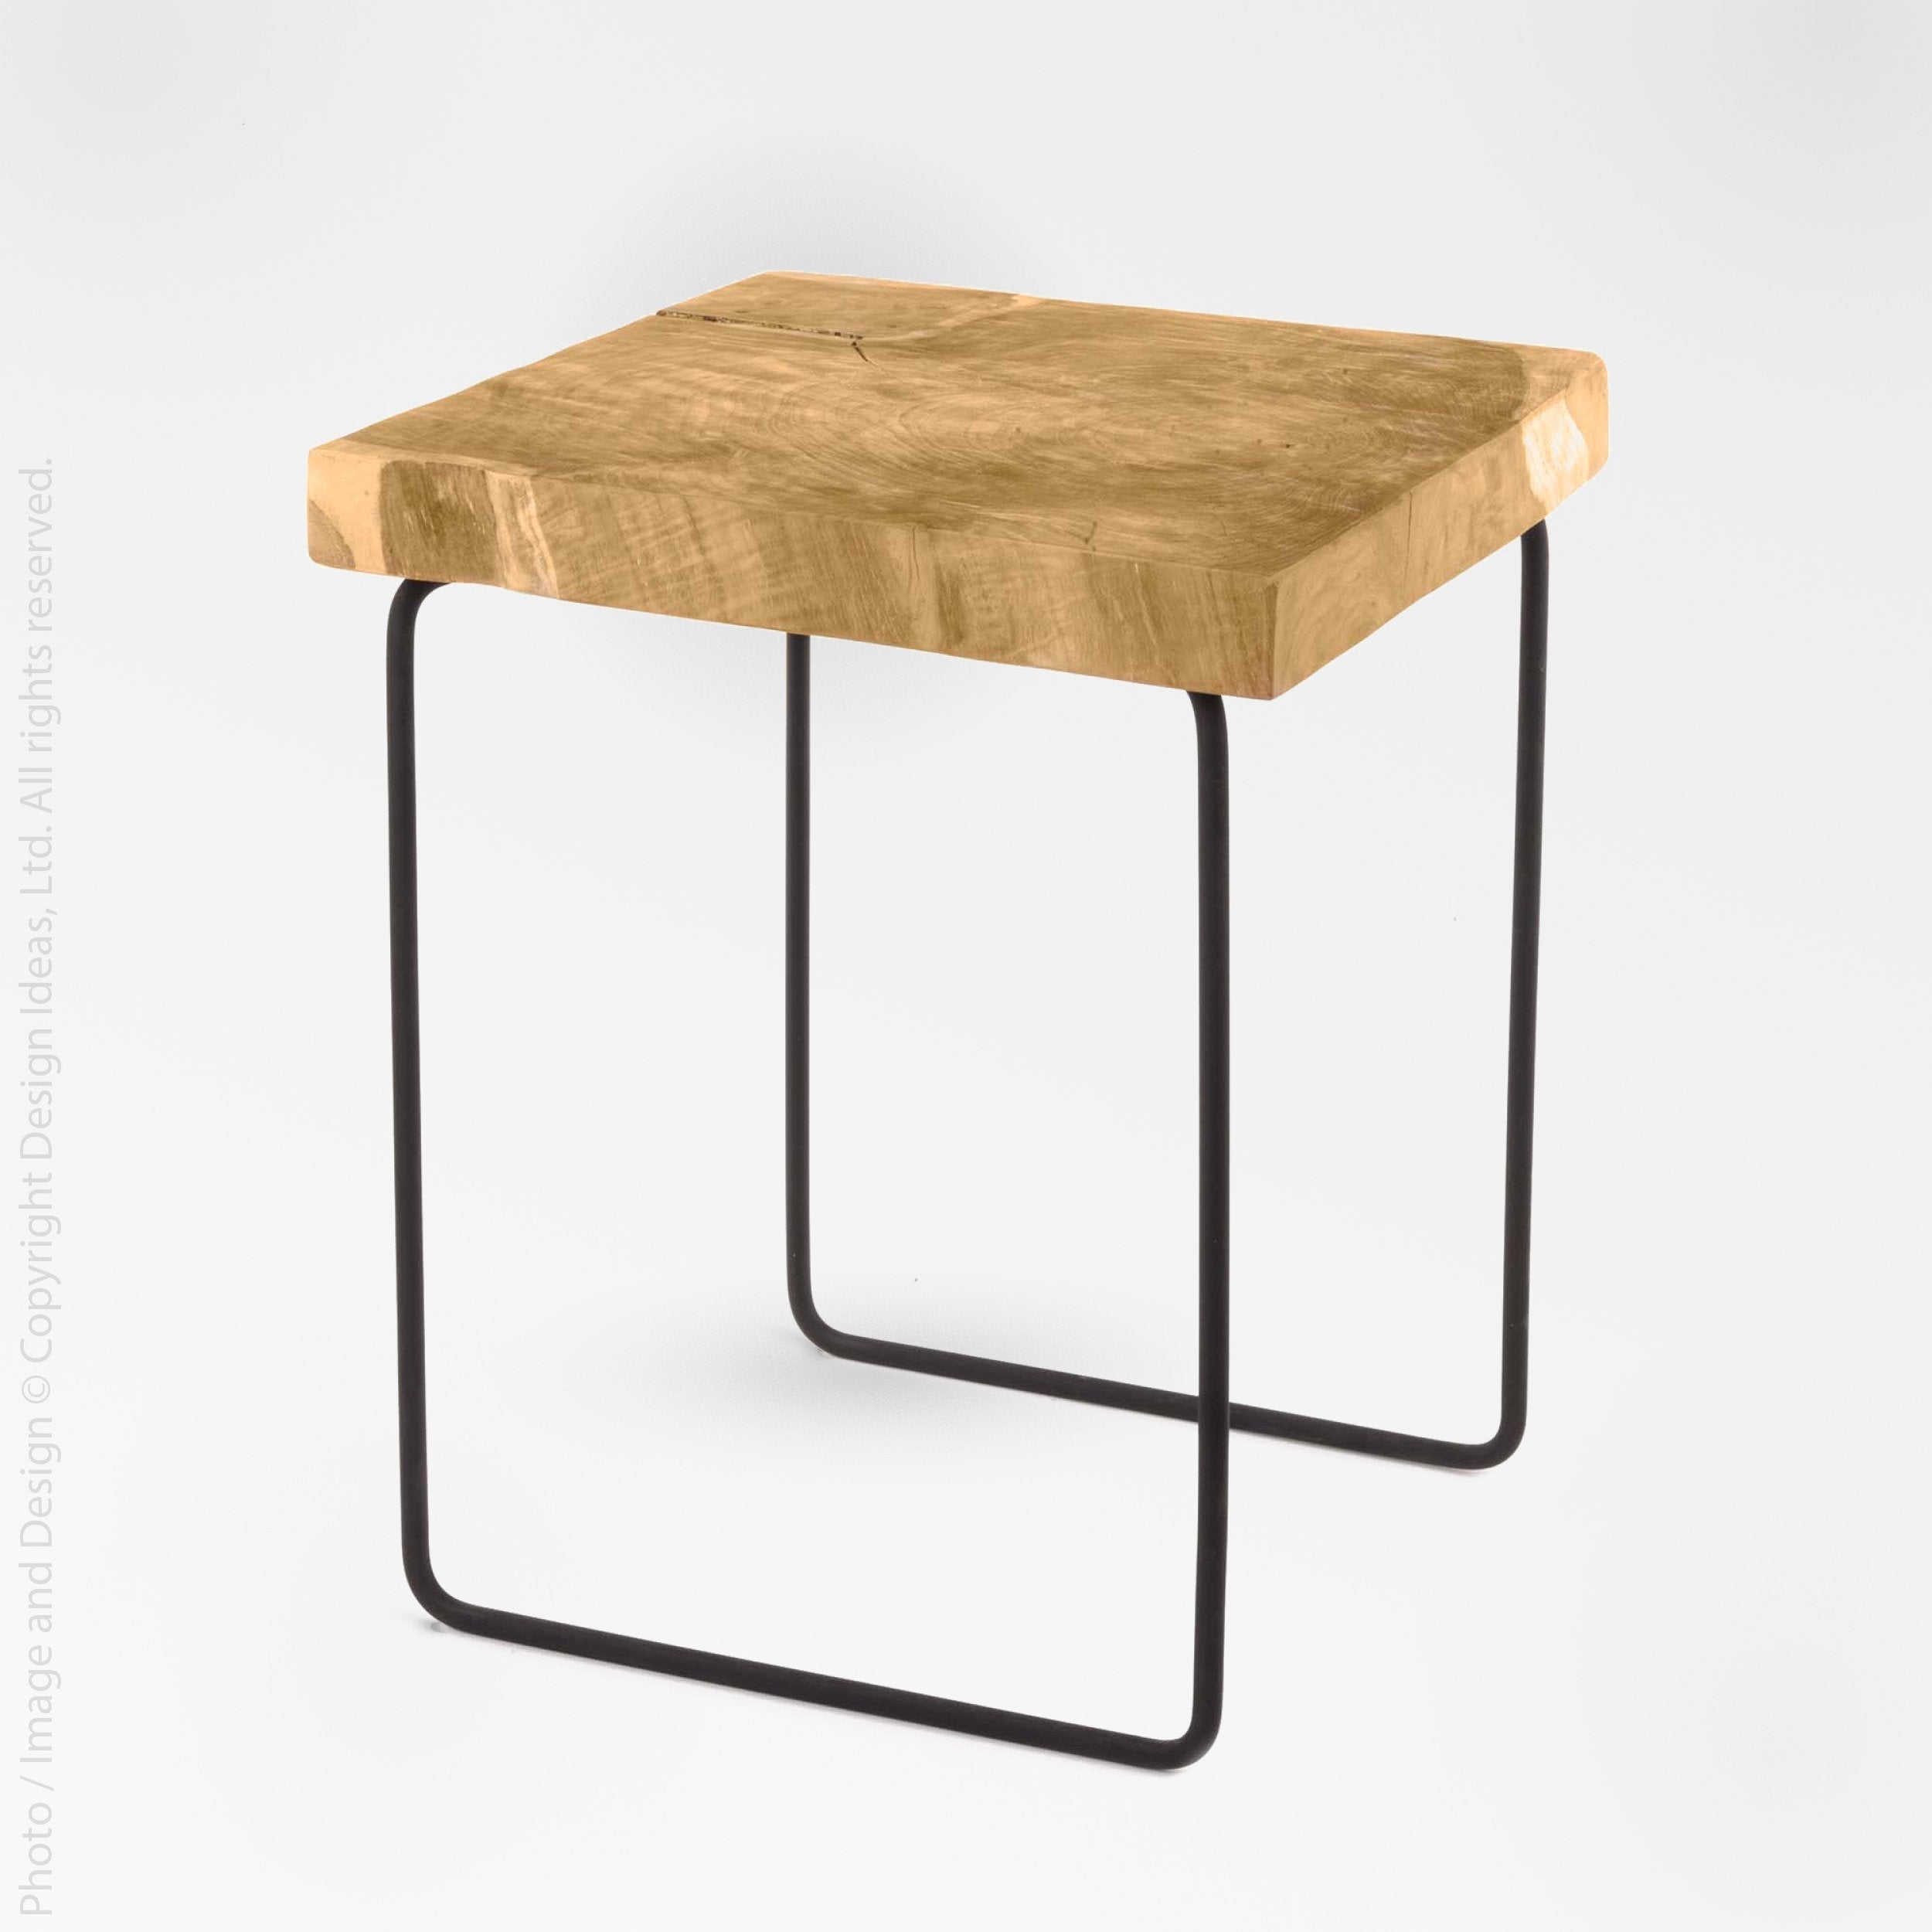 Takara Teak End Table - Natural Color | Image 1 | From the Takara Collection | Skillfully assembled with natural teak for long lasting use | This table is sustainably sourced | Available in natural color | texxture home